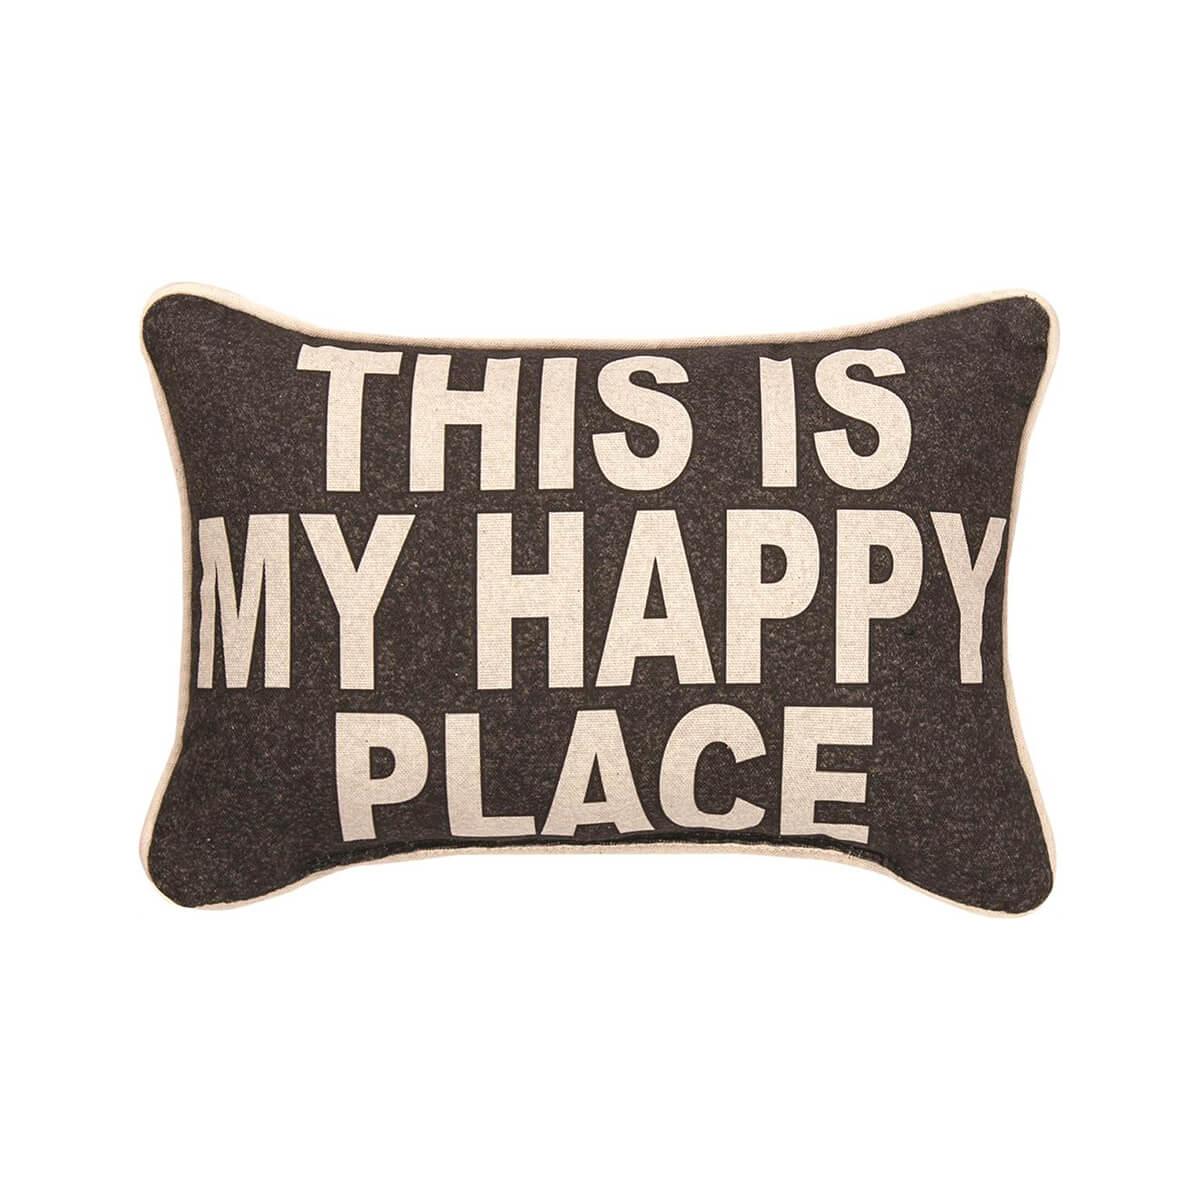  My Happy Place Pillow